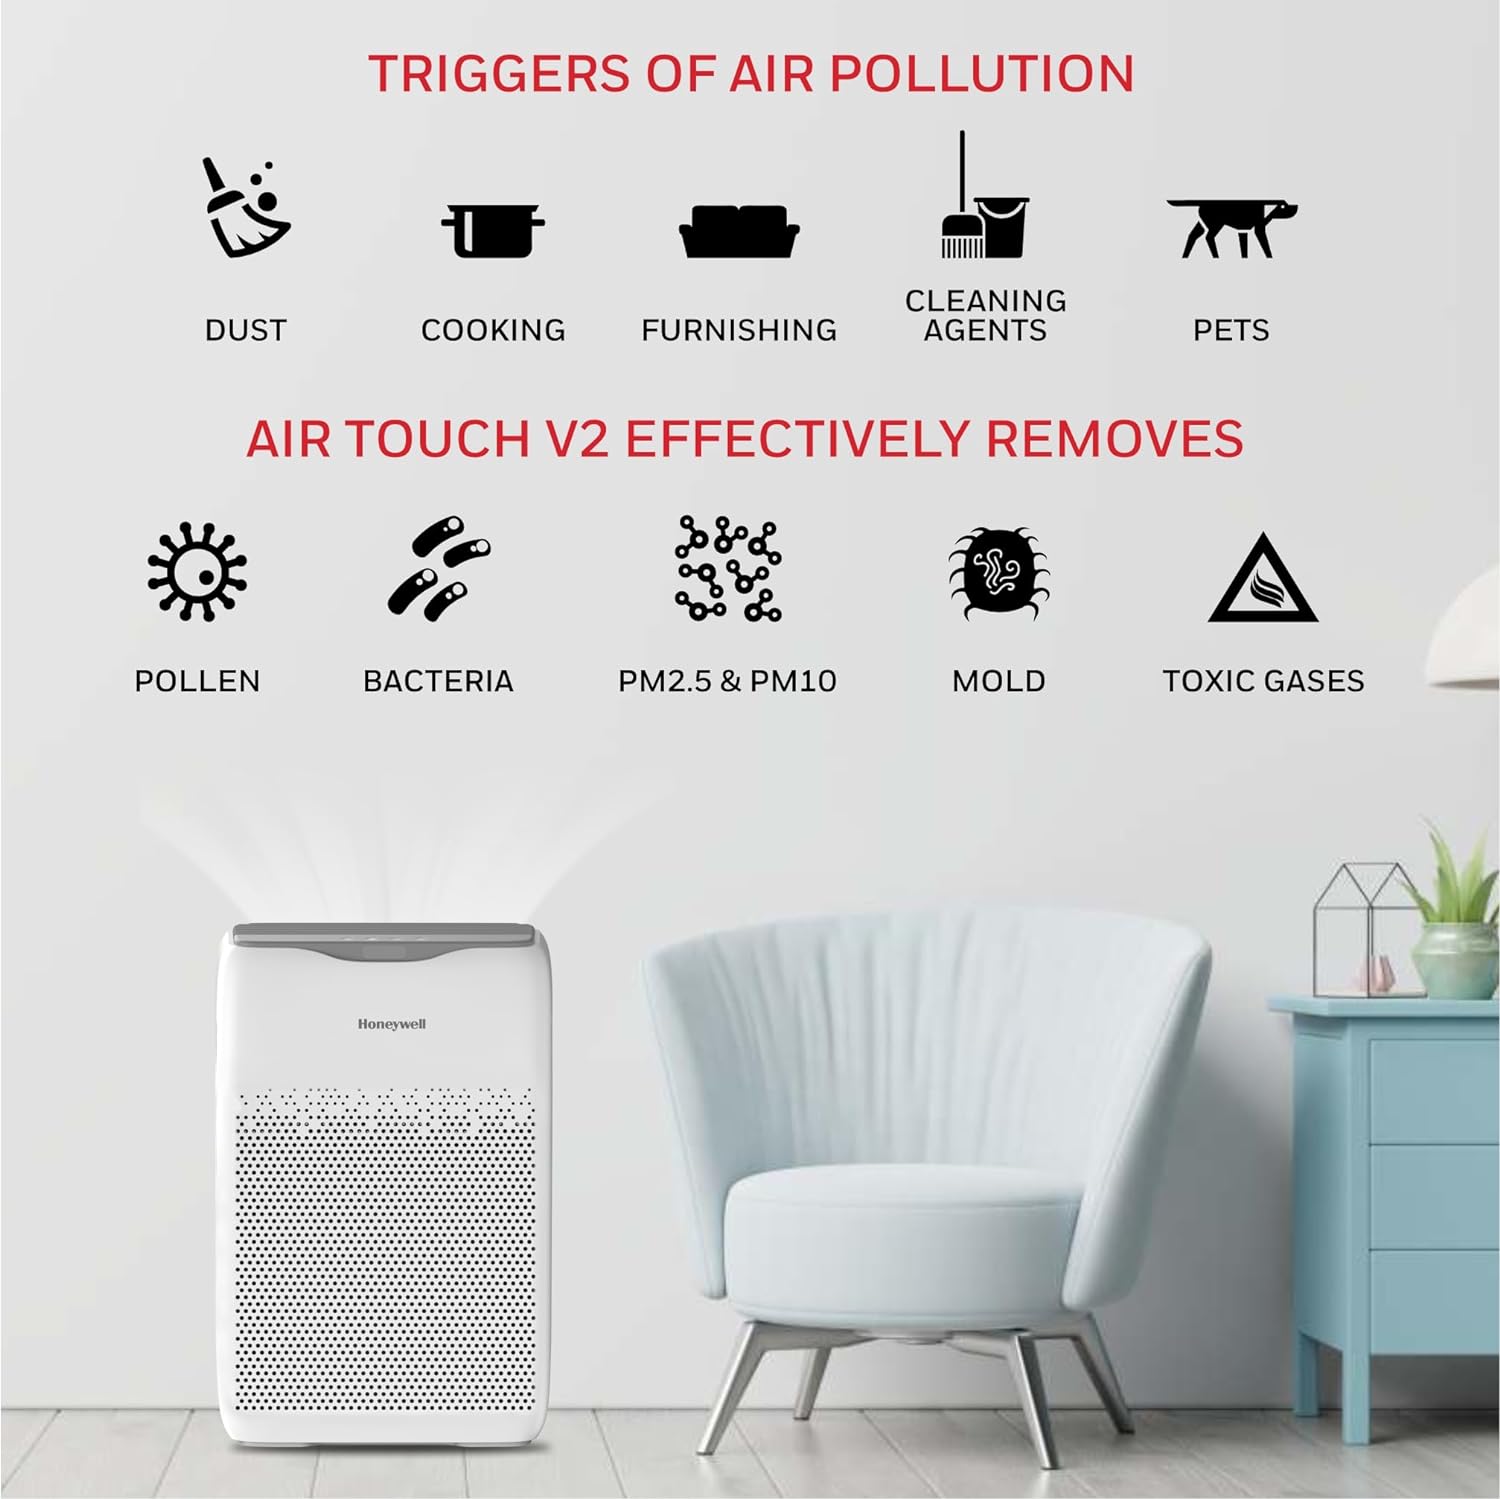 Honeywell Air touch V2 Indoor Air Purifier, Pre-Filter, H13 HEPA Filter, Activated Carbon Filter, 4 Stage Filtration, Coverage Area of 388 sq.ft - Mahajan Electronics Online